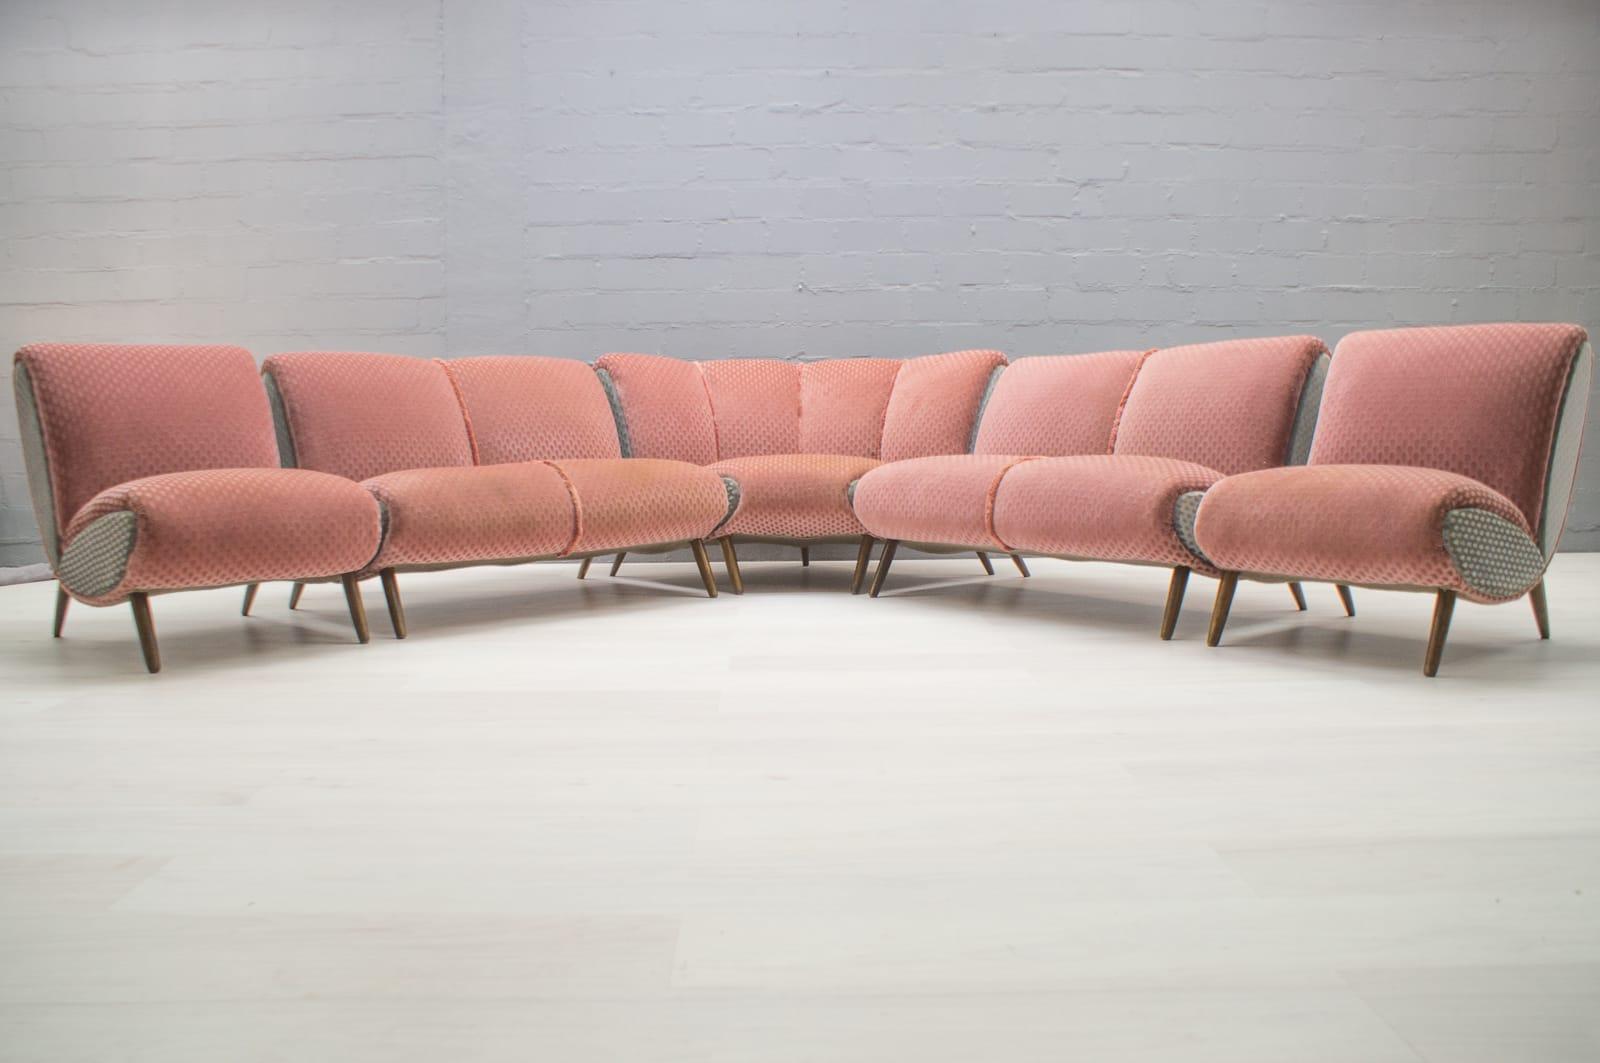 Extremely rare huge sofa set by Norman Bel Geddes from the 1950s. 
We have the set from the possession of a US soldier stationed in Germany or Roth after the 2nd World War. 

In the variant with two two-seat sofas, two single armchairs and the